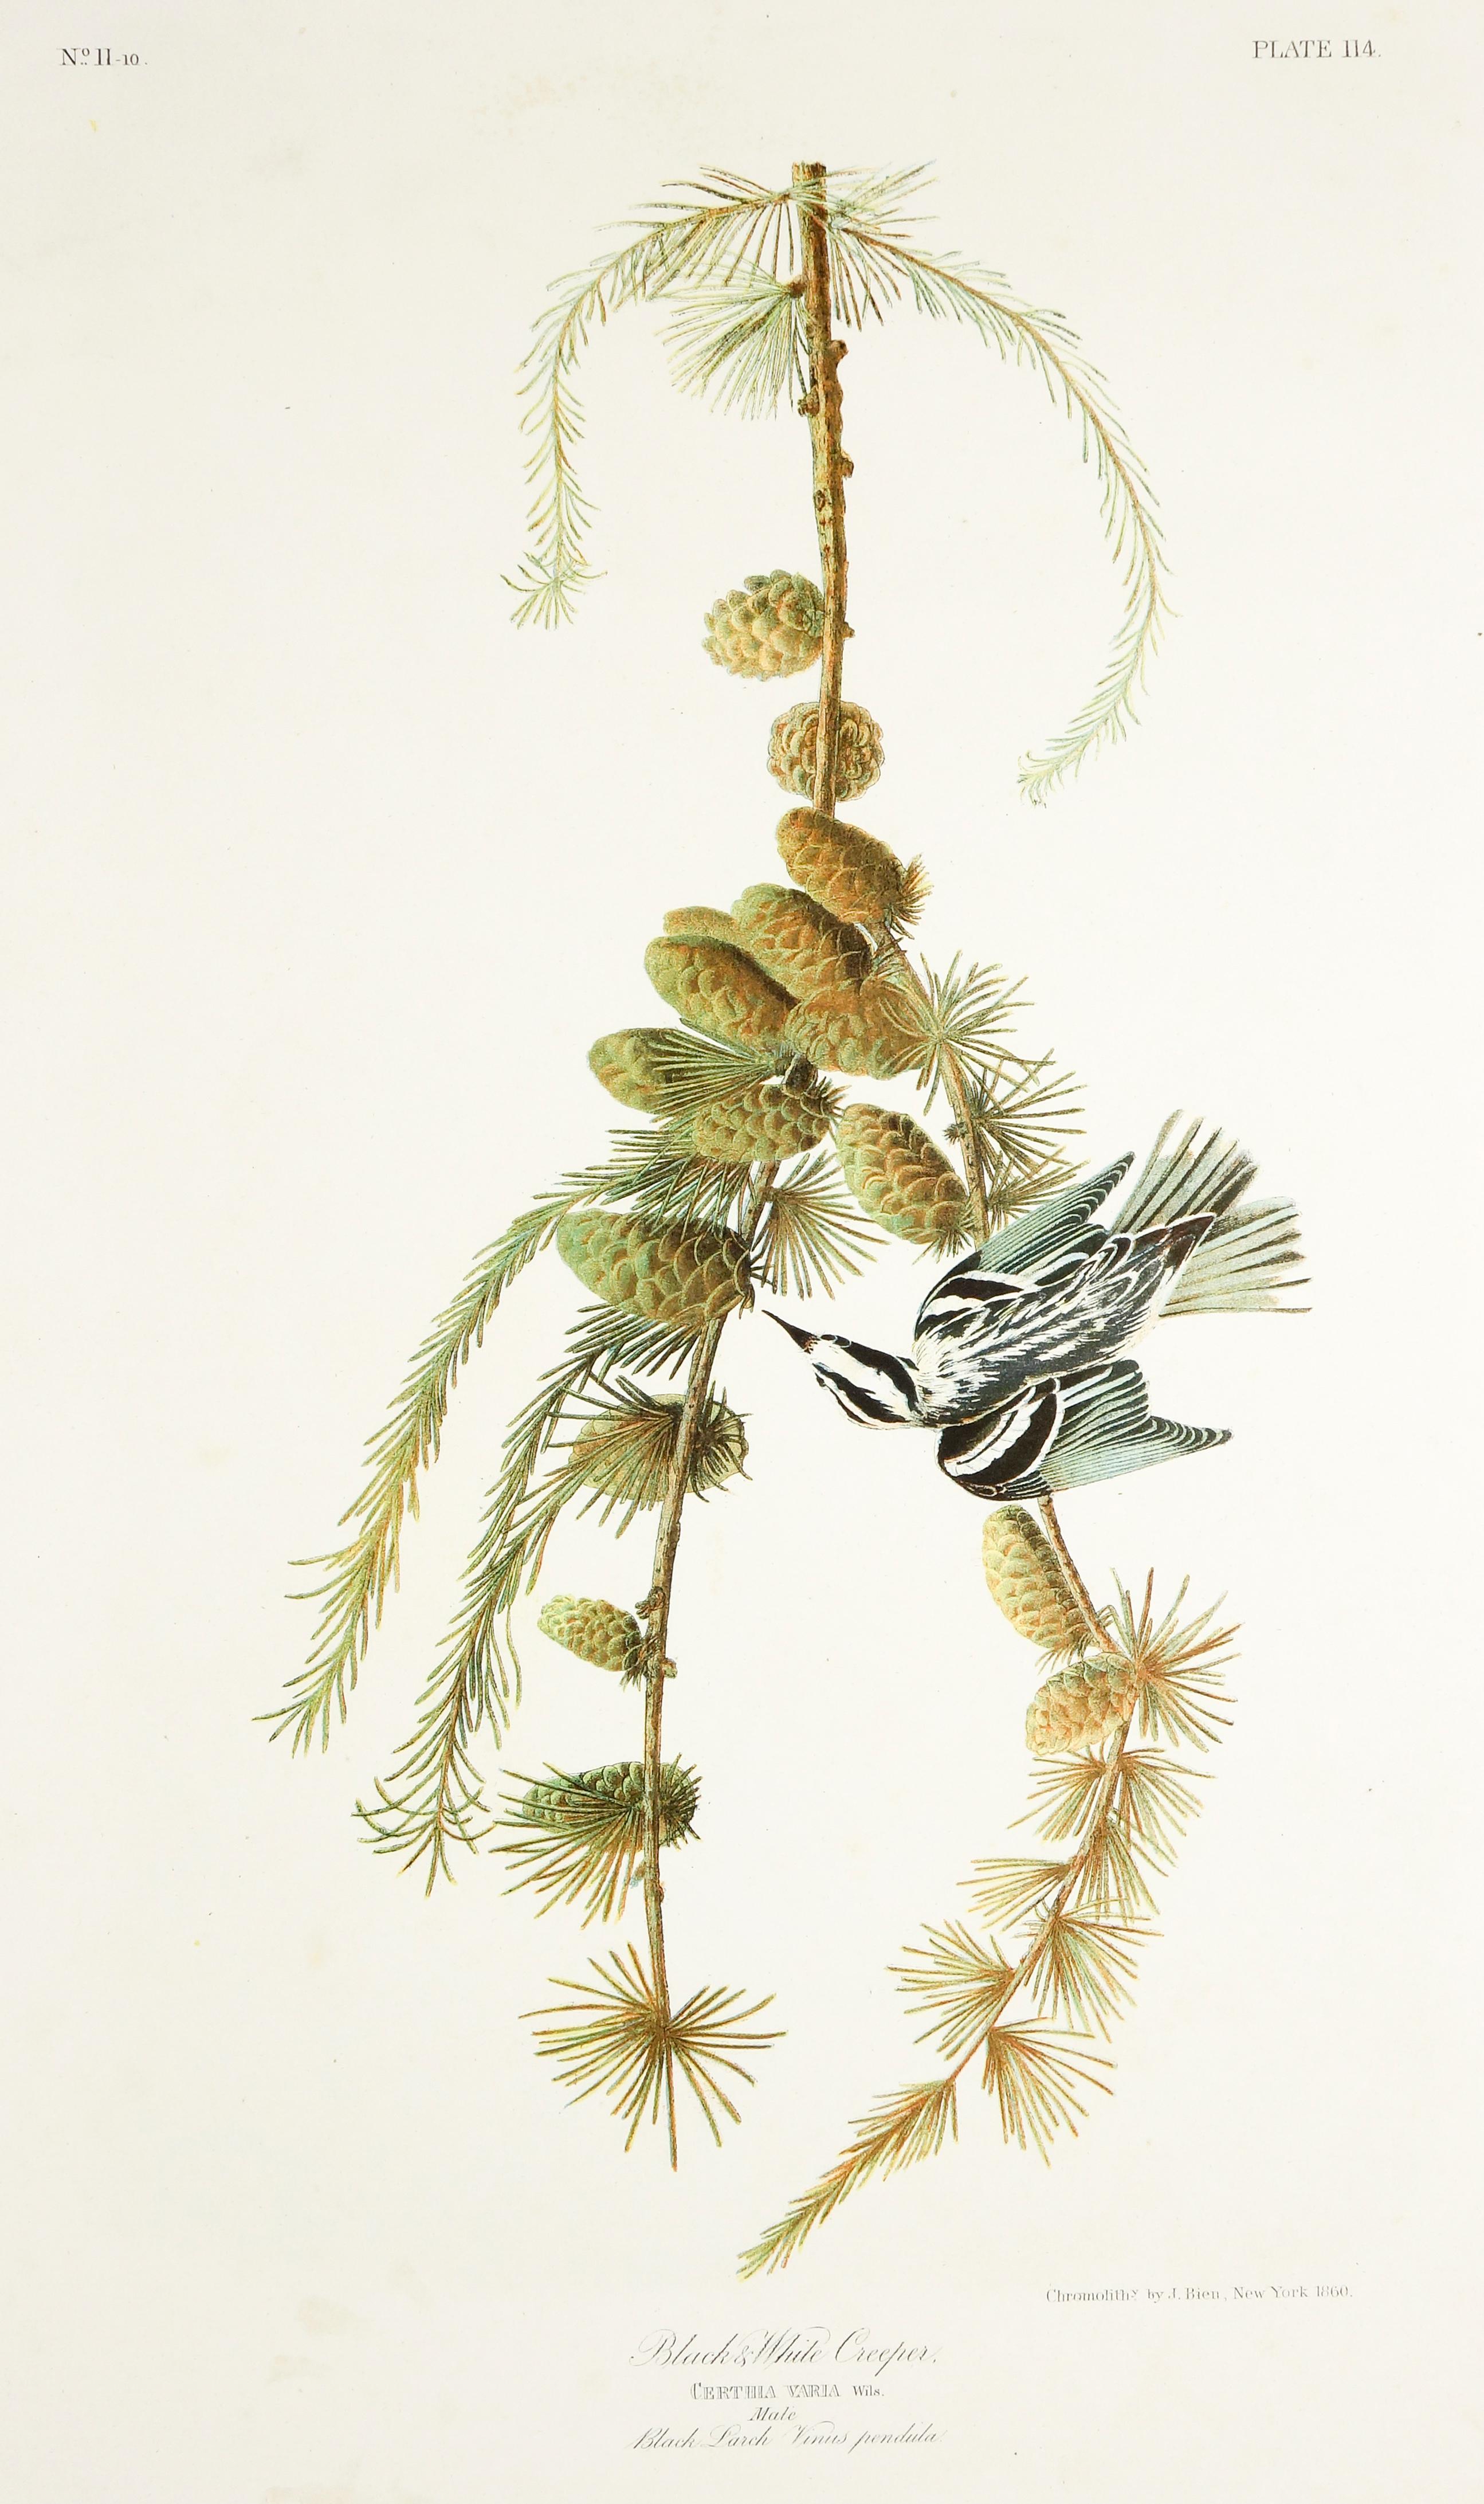 Original color lithograph of Crested Titmouse and Black and White Creeper from John James Audubon, The Birds of America, Bien Edition, 1860. Unframed. Image size: 22 x 14 inches each.

Produced between 1858 and 1860, the Bien edition of Audubon’s